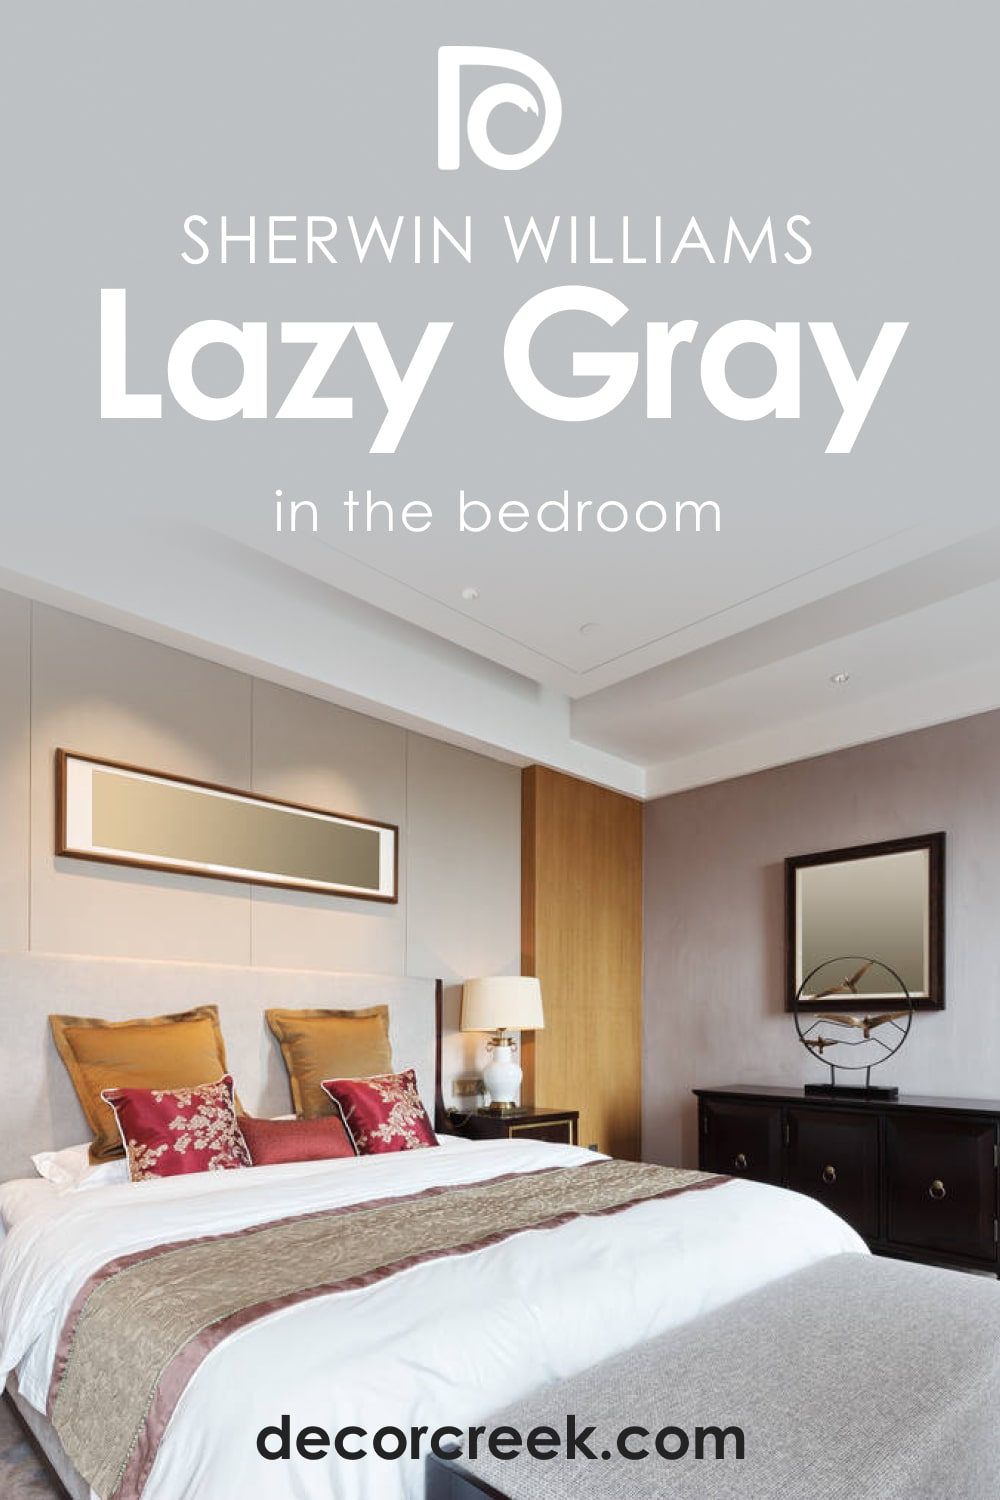 Lazy Gray SW-6254 in a Bedroom